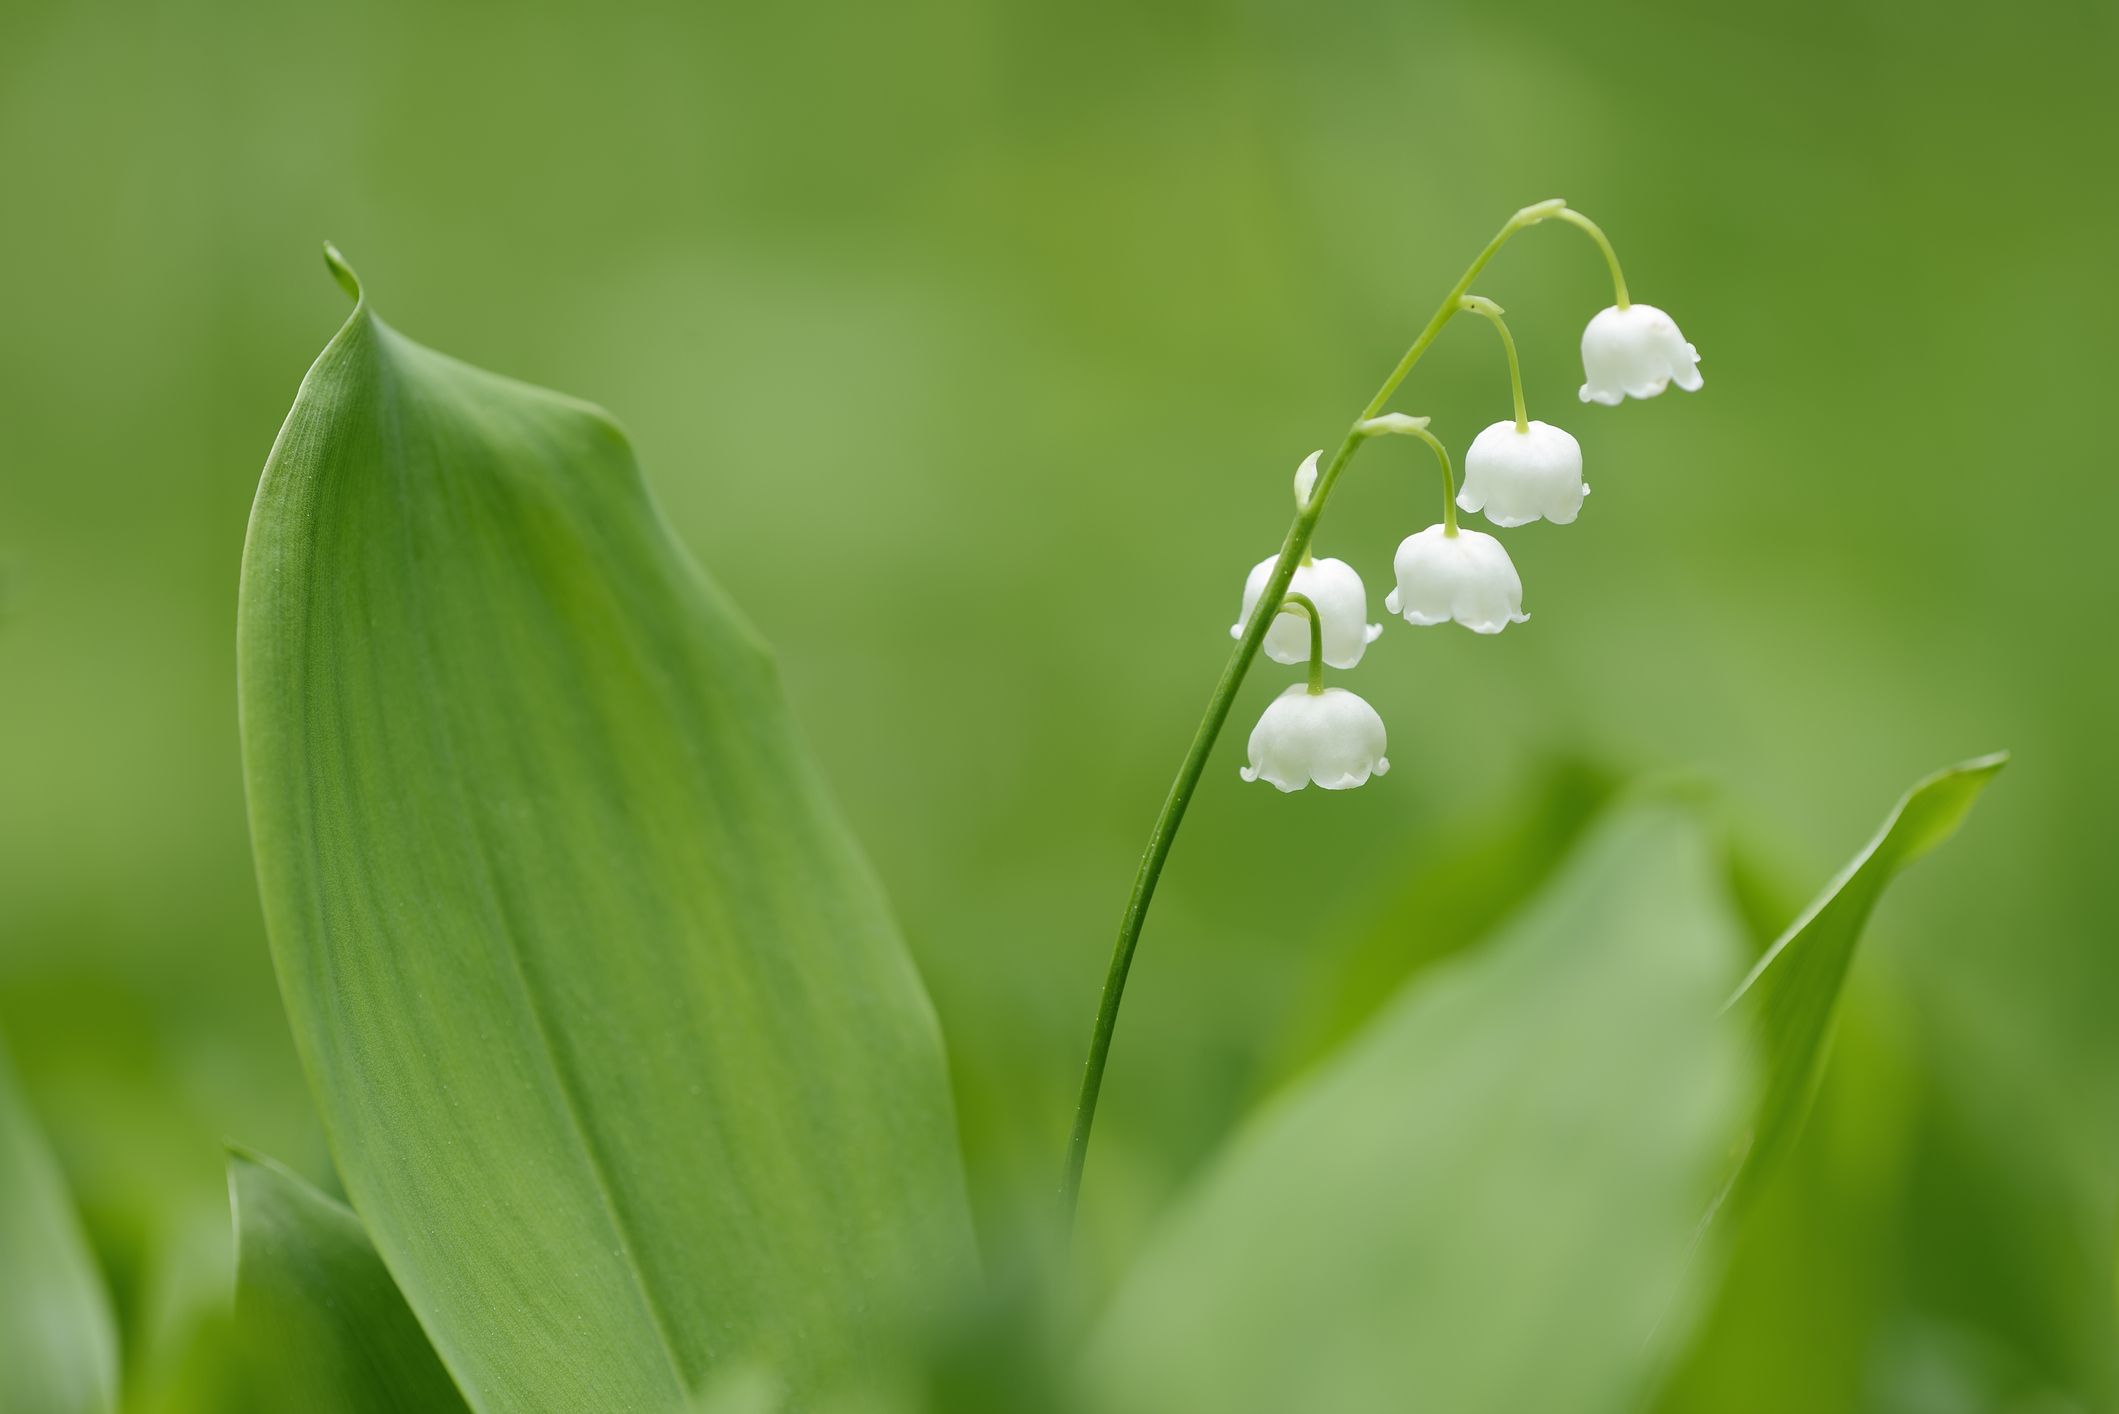 Lily of the Valley Meaning, Symbolism and Connection to the Queen